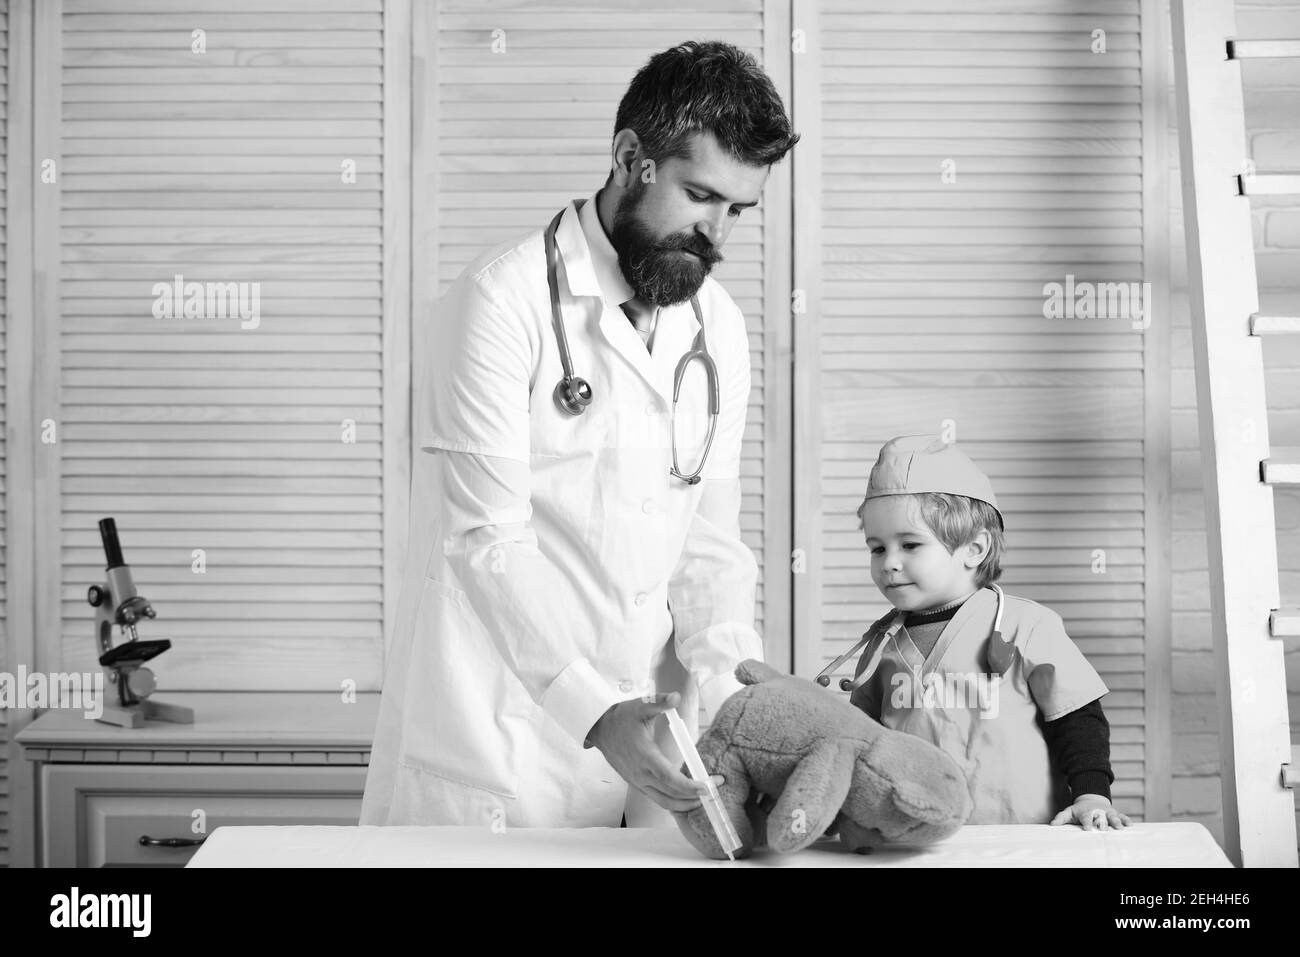 Vet and little assistant make injection to teddy bear. Father and kid with busy faces play doctor. Treatment and childhood concept. Man with beard and boy hold syringe on wooden background. Stock Photo